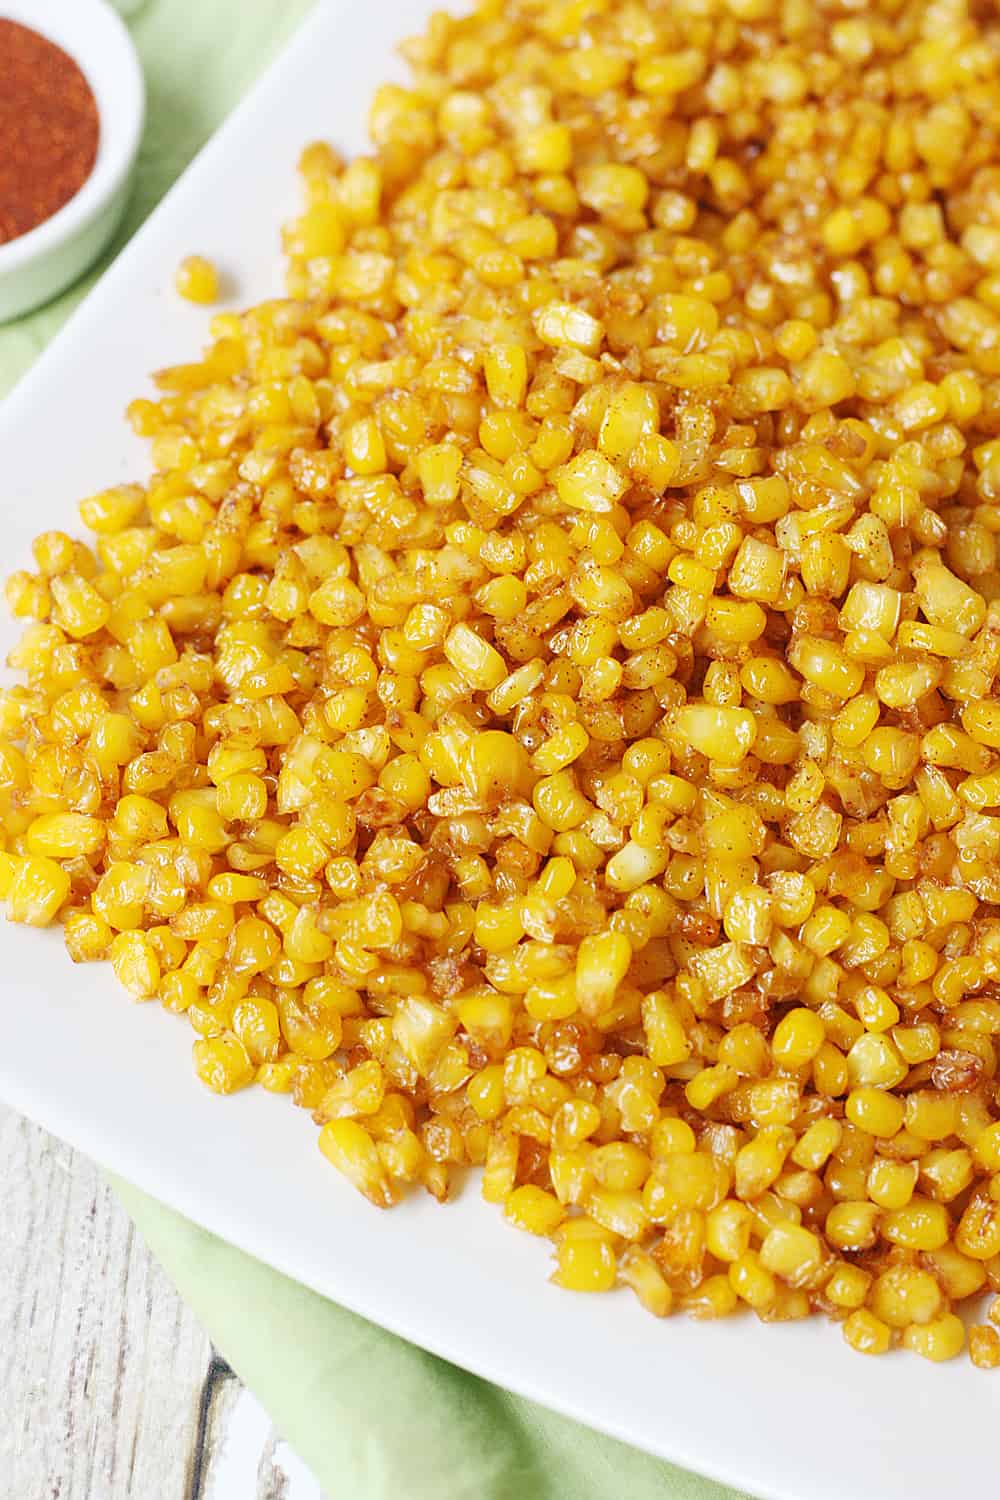 Roasted corn on a plate with a spoon close-up.